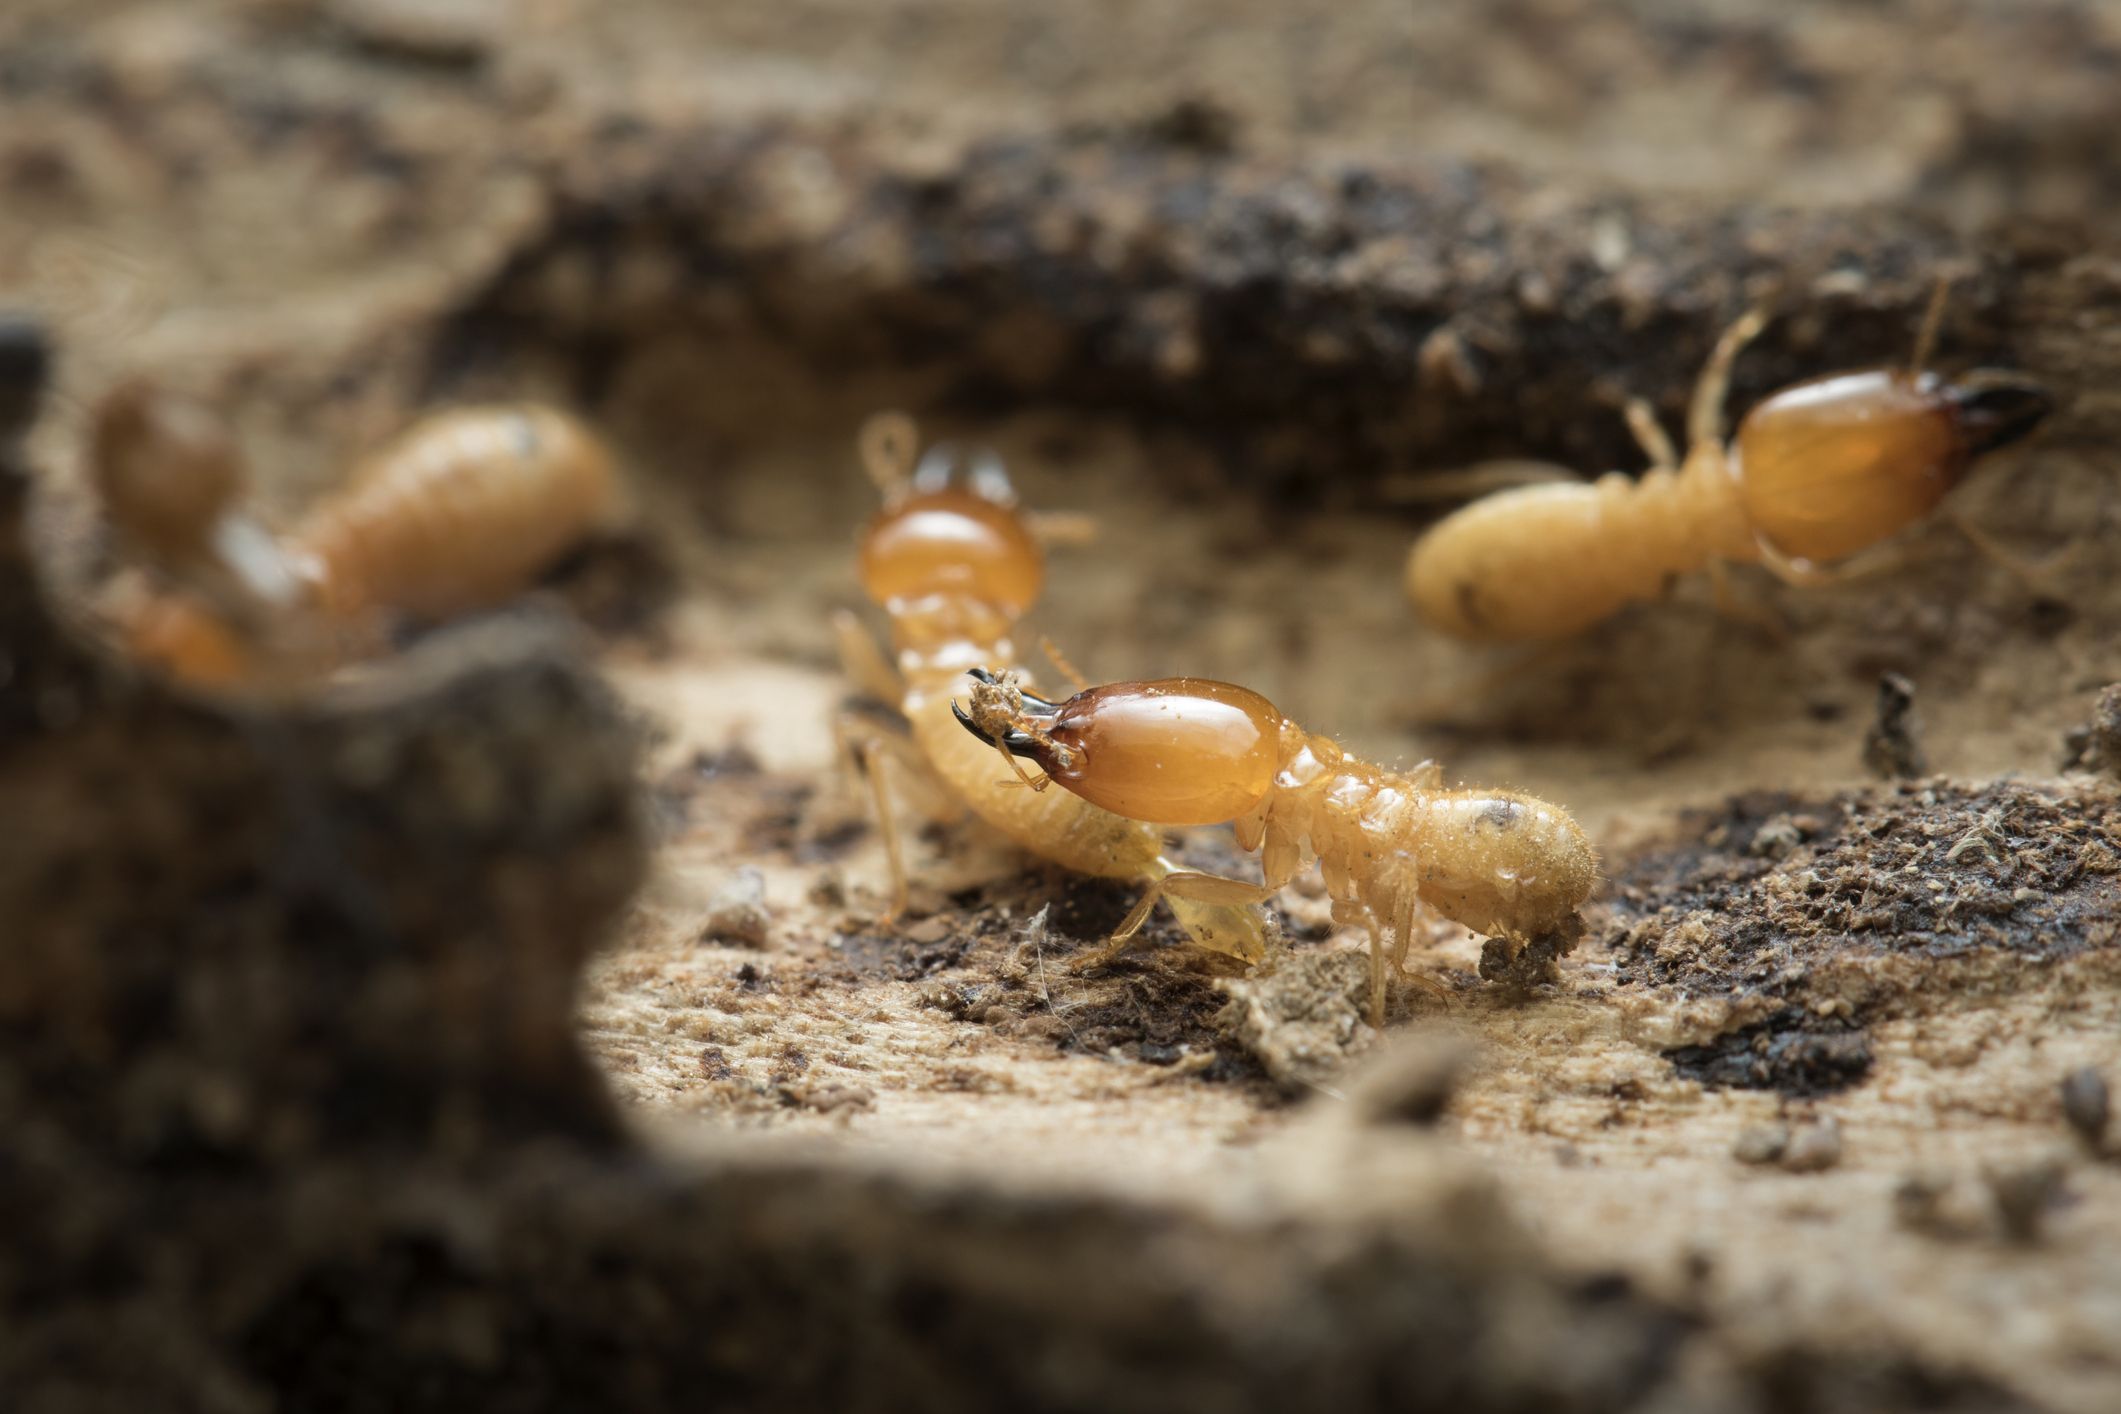 The unseen destroyer: Navigating termites in B.C. | The Province